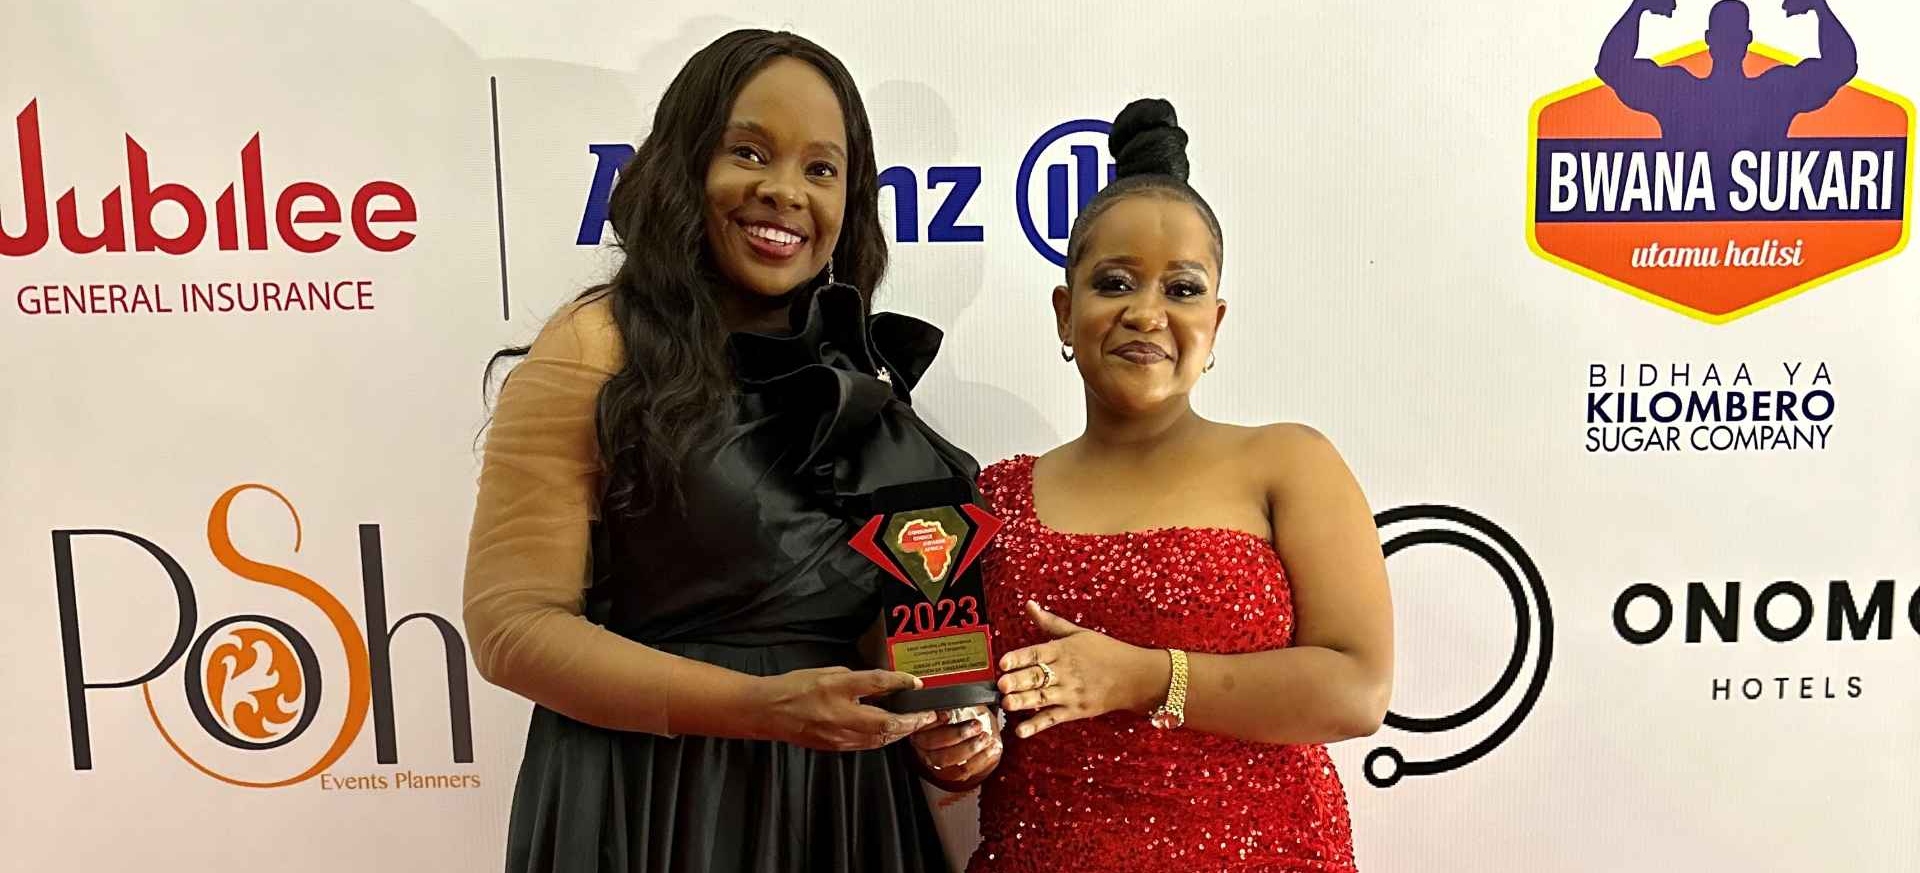 Most Reliable Life Insurance Company in Tanzania by Consumer Choice Awards Africa.